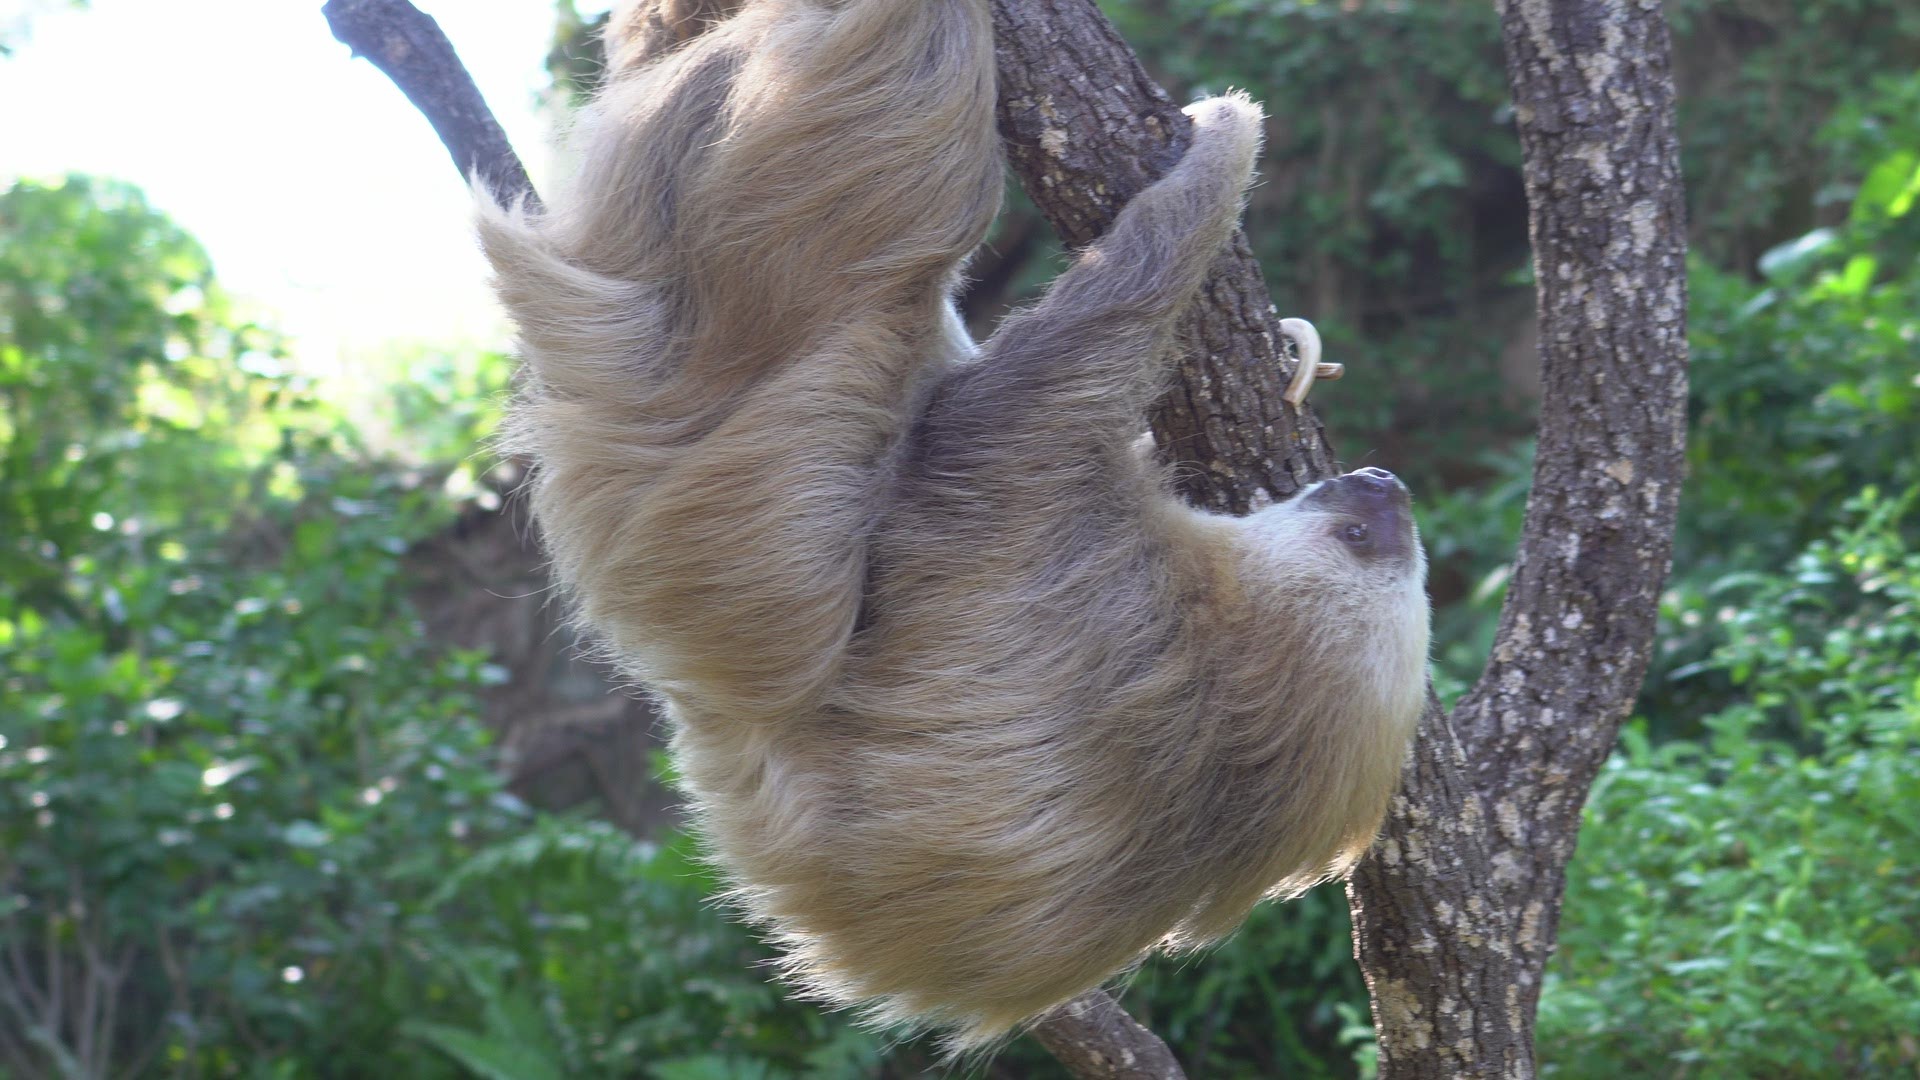 October 20 is International Sloth Day. To celebrate here is our favorite sloth, Harry from Busch Gardens Tampa Bay.